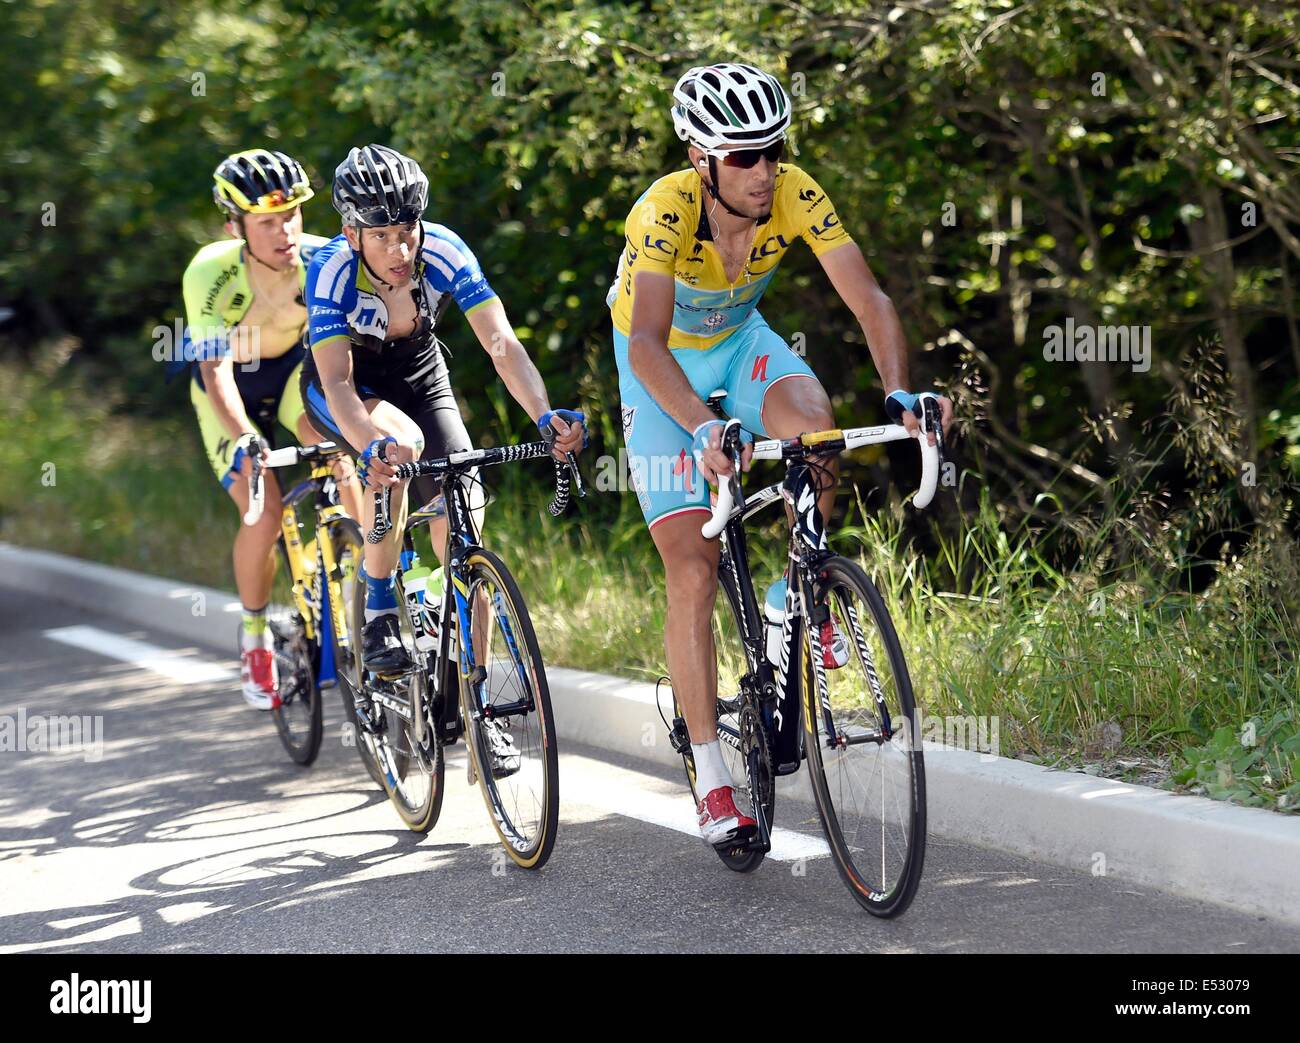 18.07.2014. St Etienne to Chamrousse, France. Tour de France Cycling Tour, stage 13. NIBALI Vincenzo ITA of Astana Pro Team Stock Photo